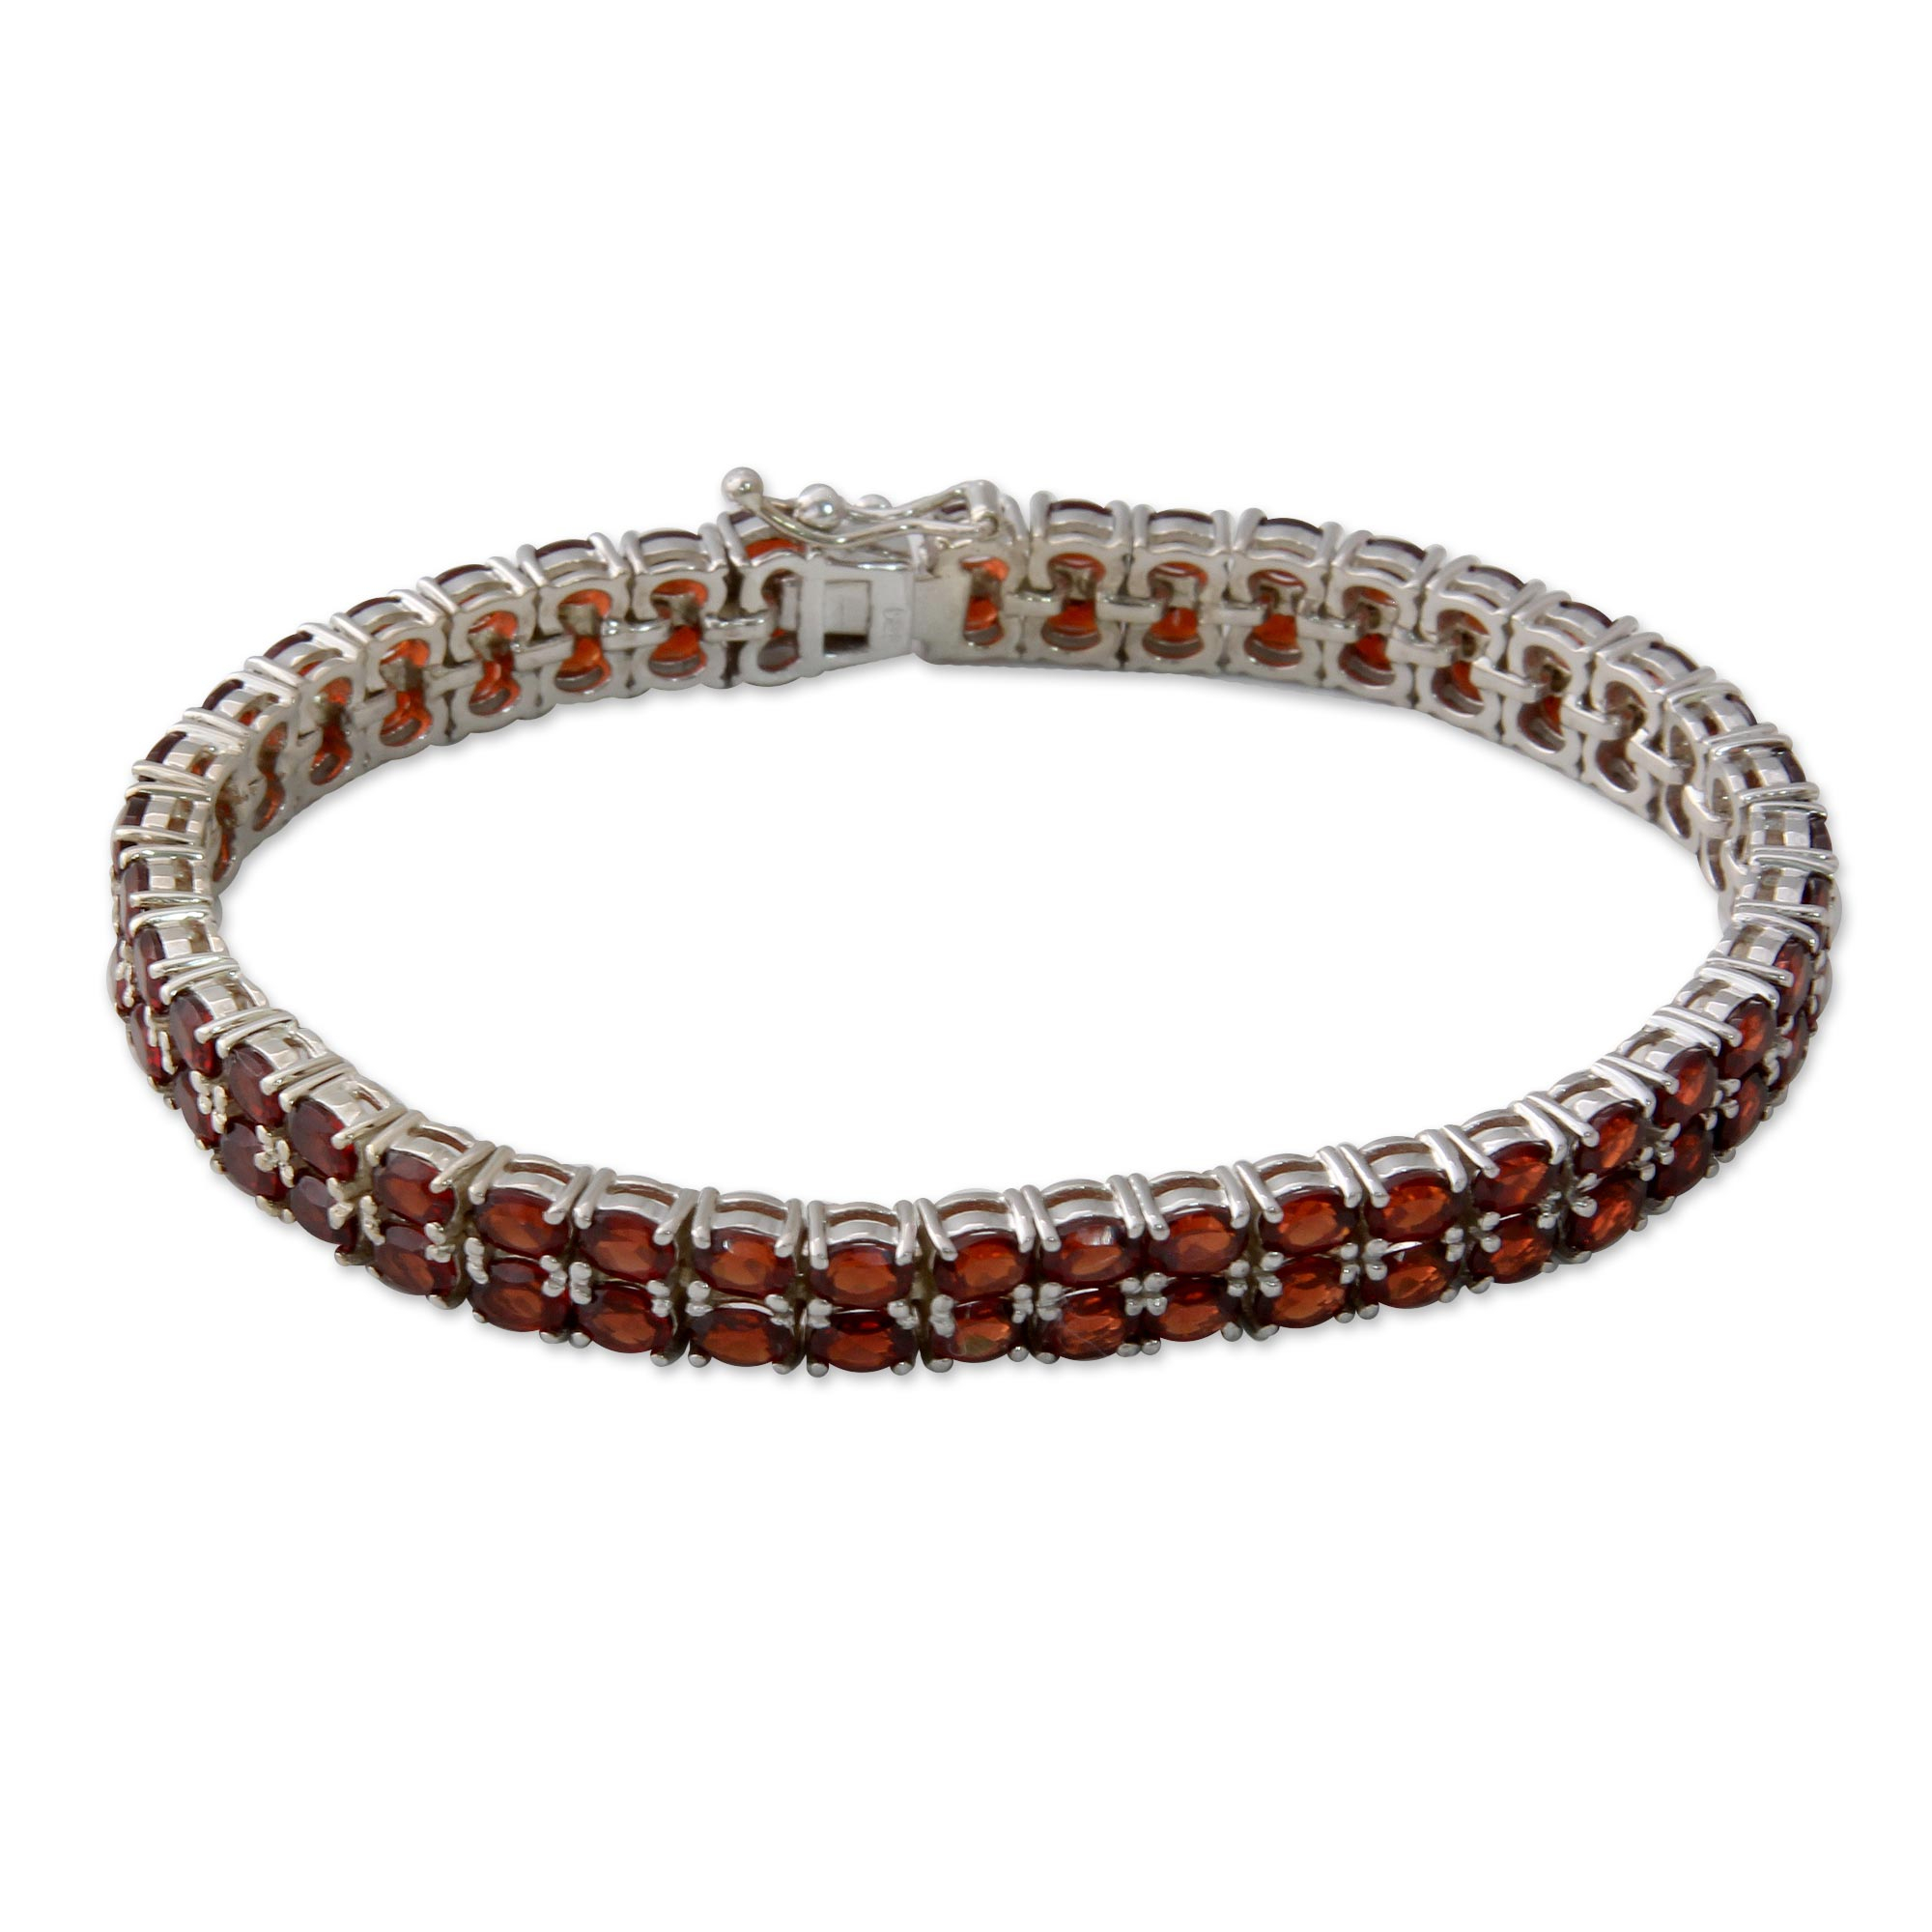 Garnet Tennis Bracelet with Sterling Silver Crafted in India - Love